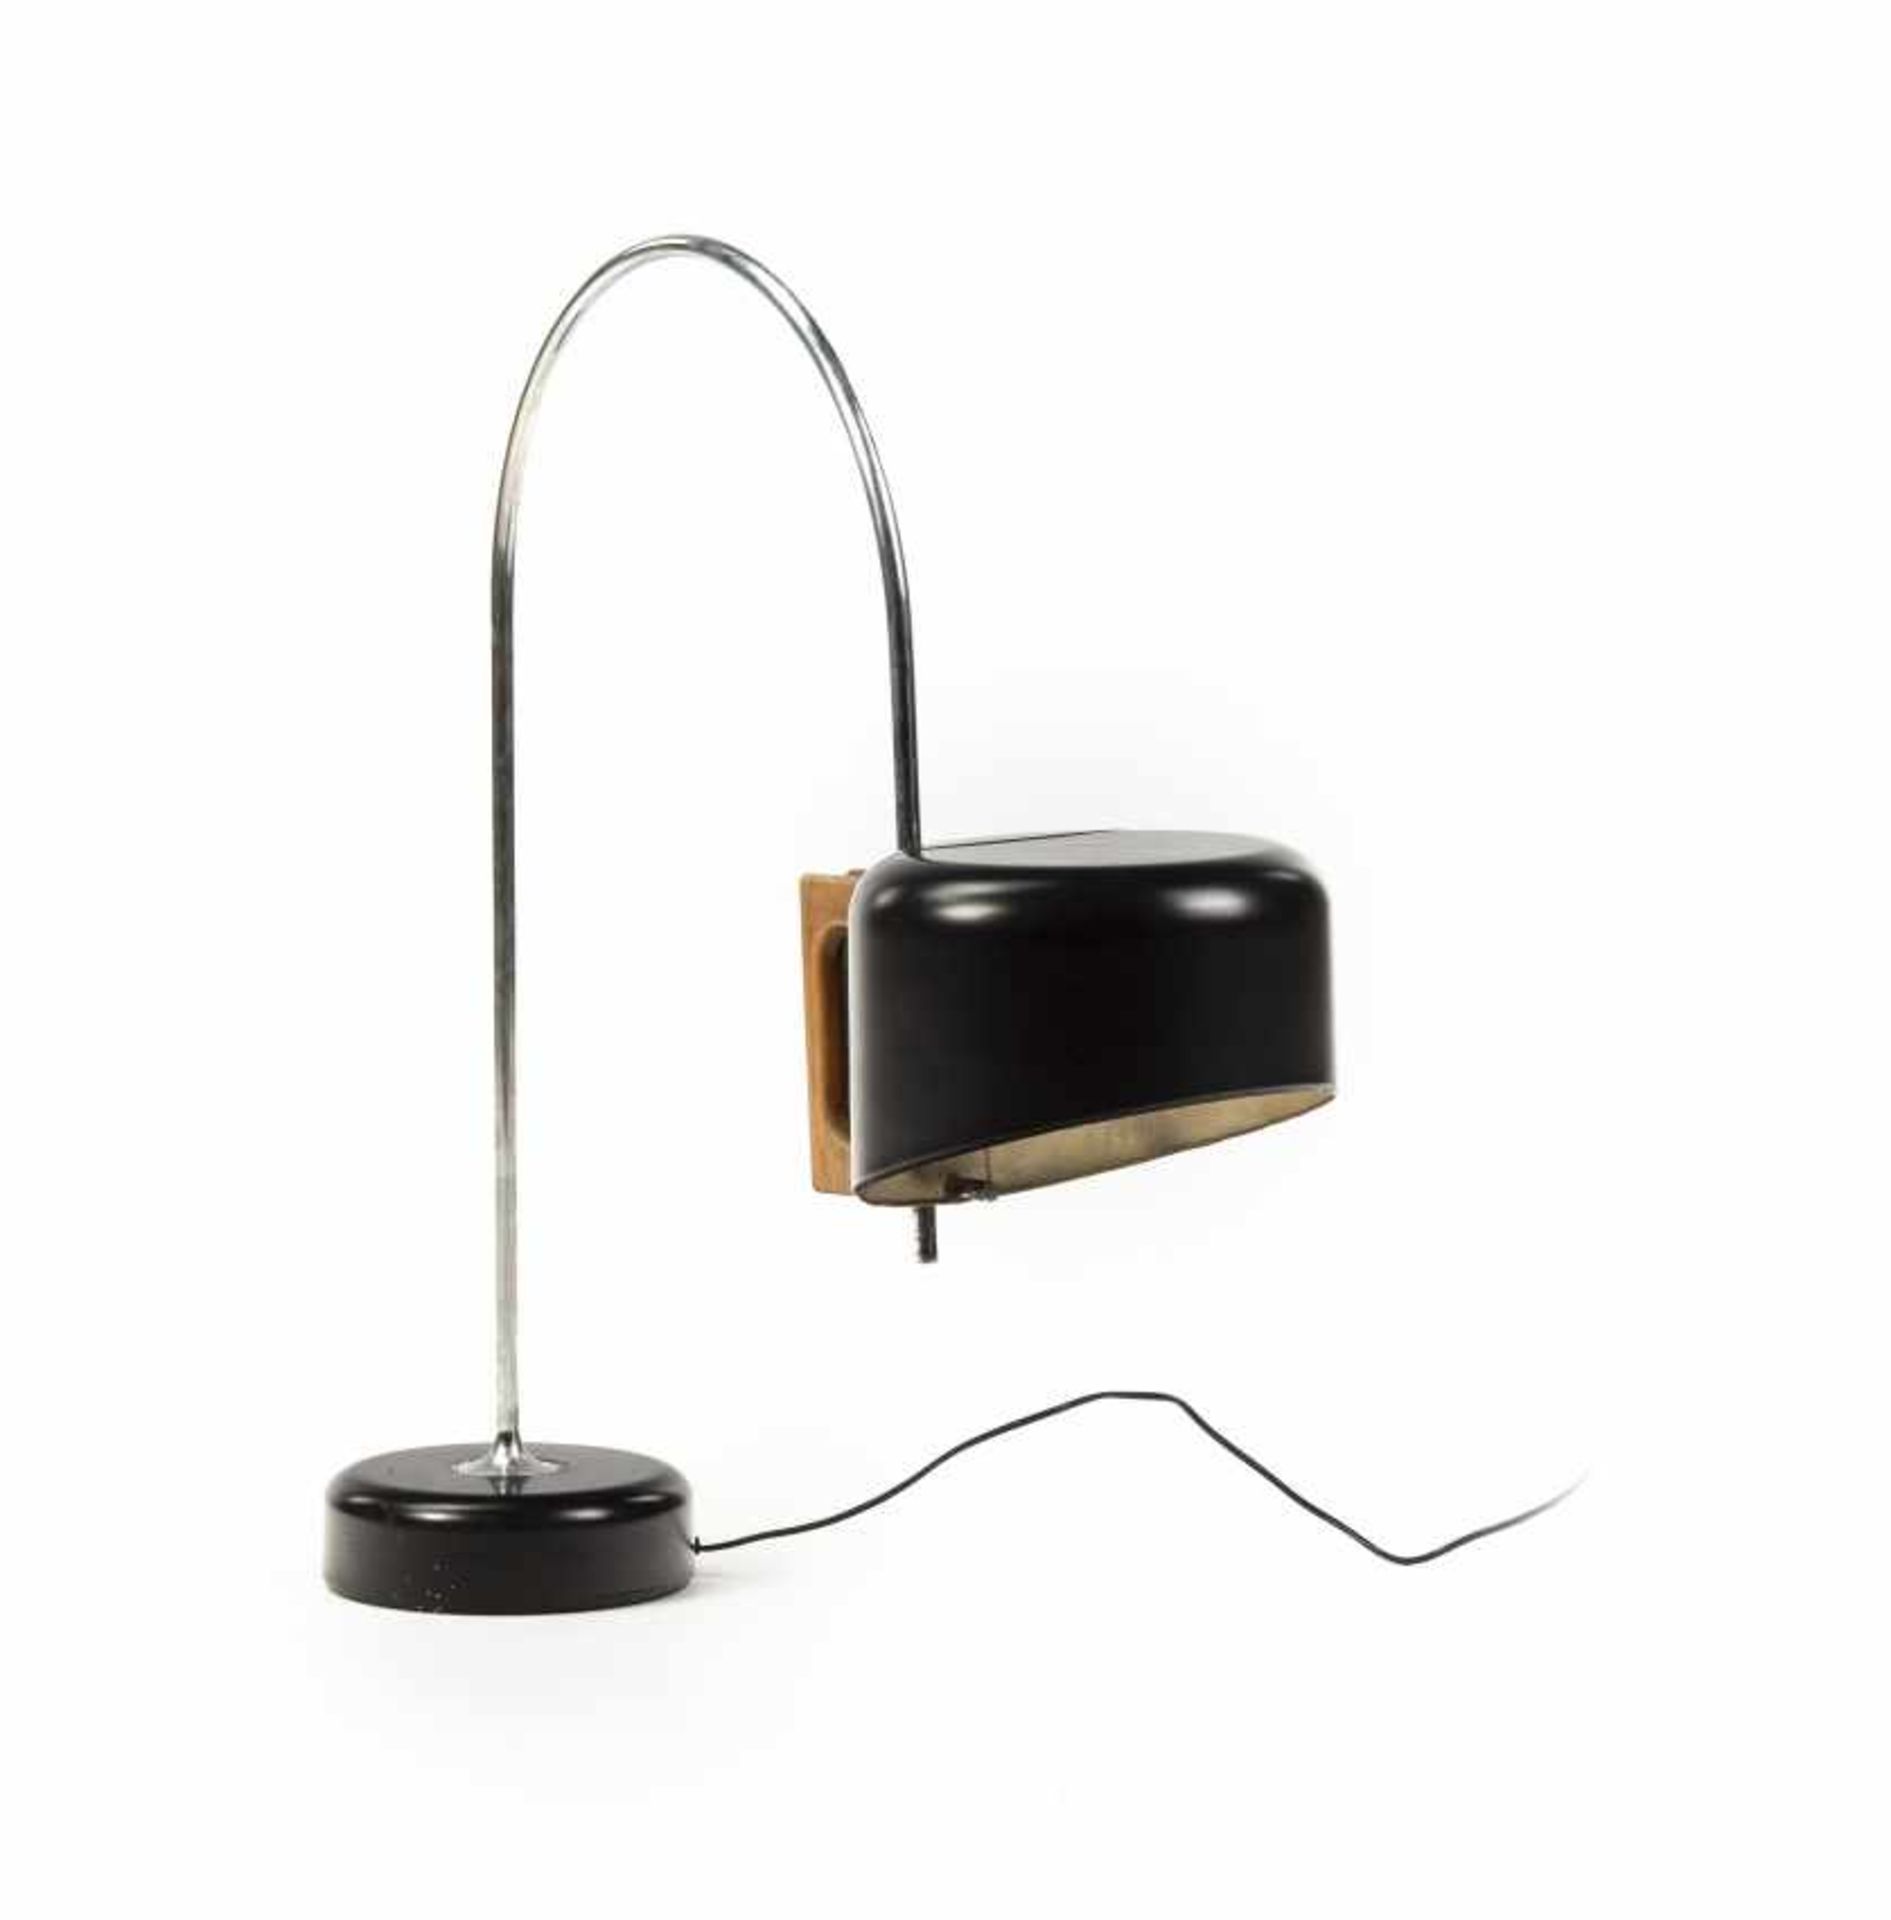 Tomás Díaz Magro, "Sauce" table lamp, Lacquered and chromeTomás Díaz MagroMadrid 1941"Sauce" table